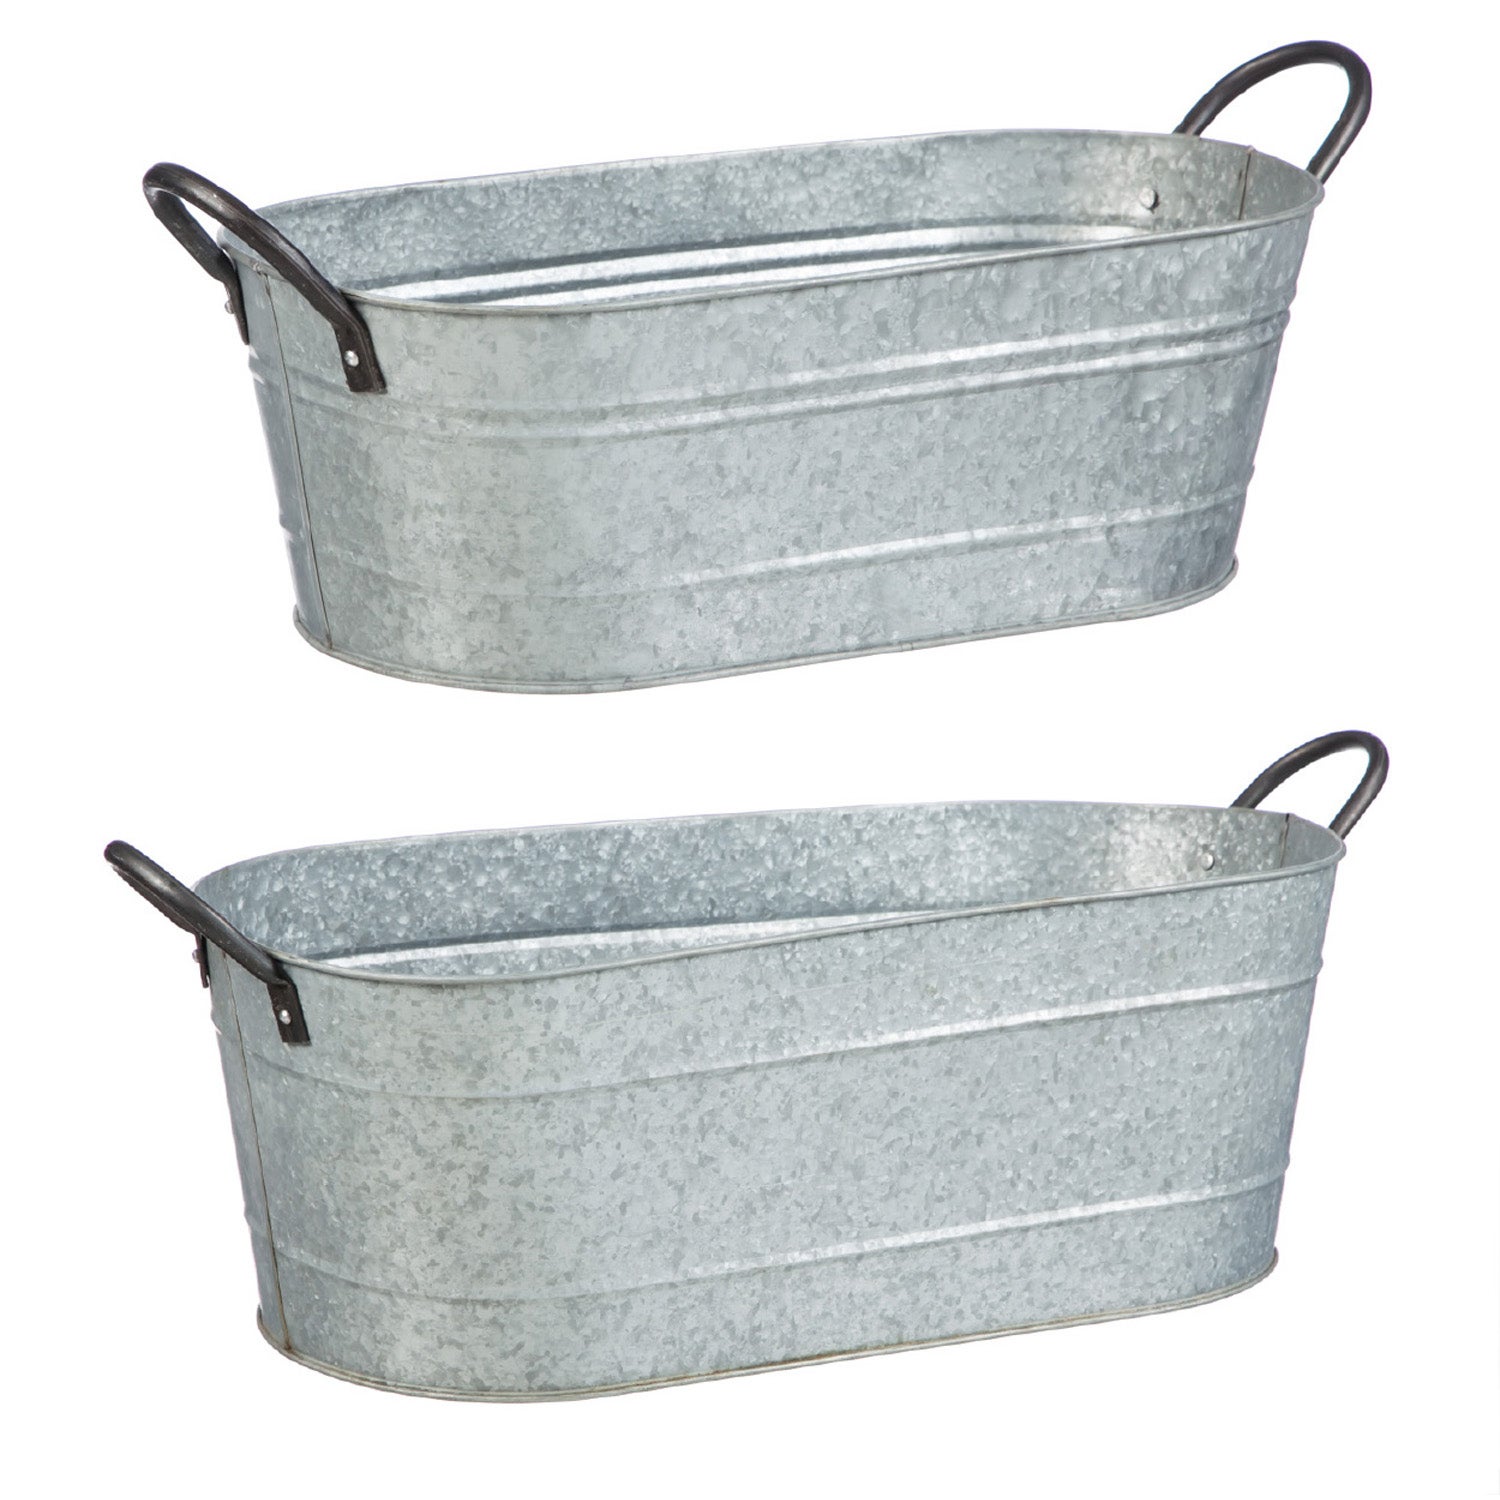 Galvanized Metal Planter Containers, Set of 2